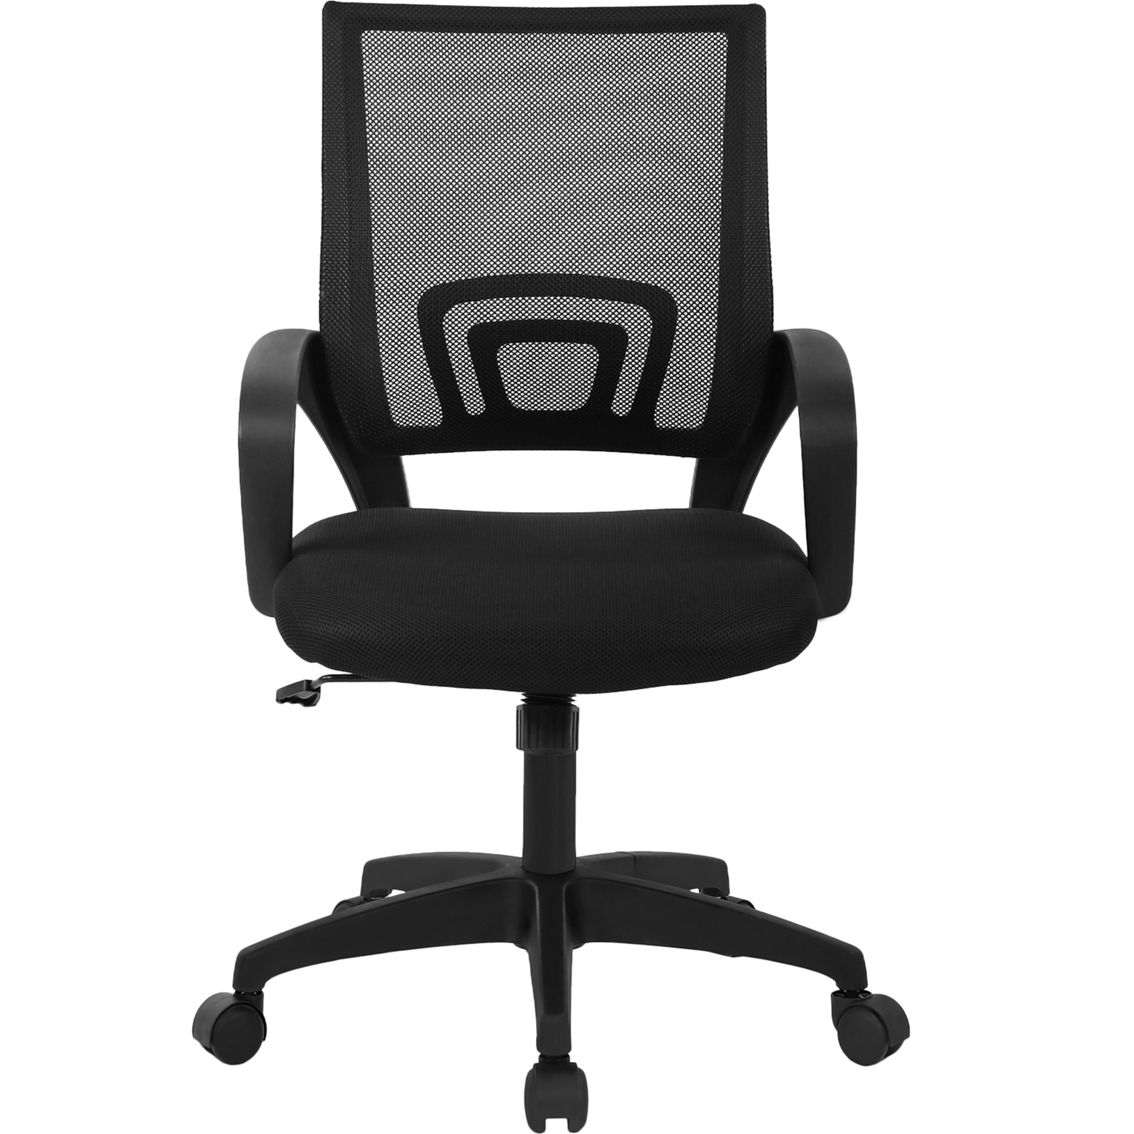 Furniture of America Corel Black Mesh Office Chair - Image 2 of 8